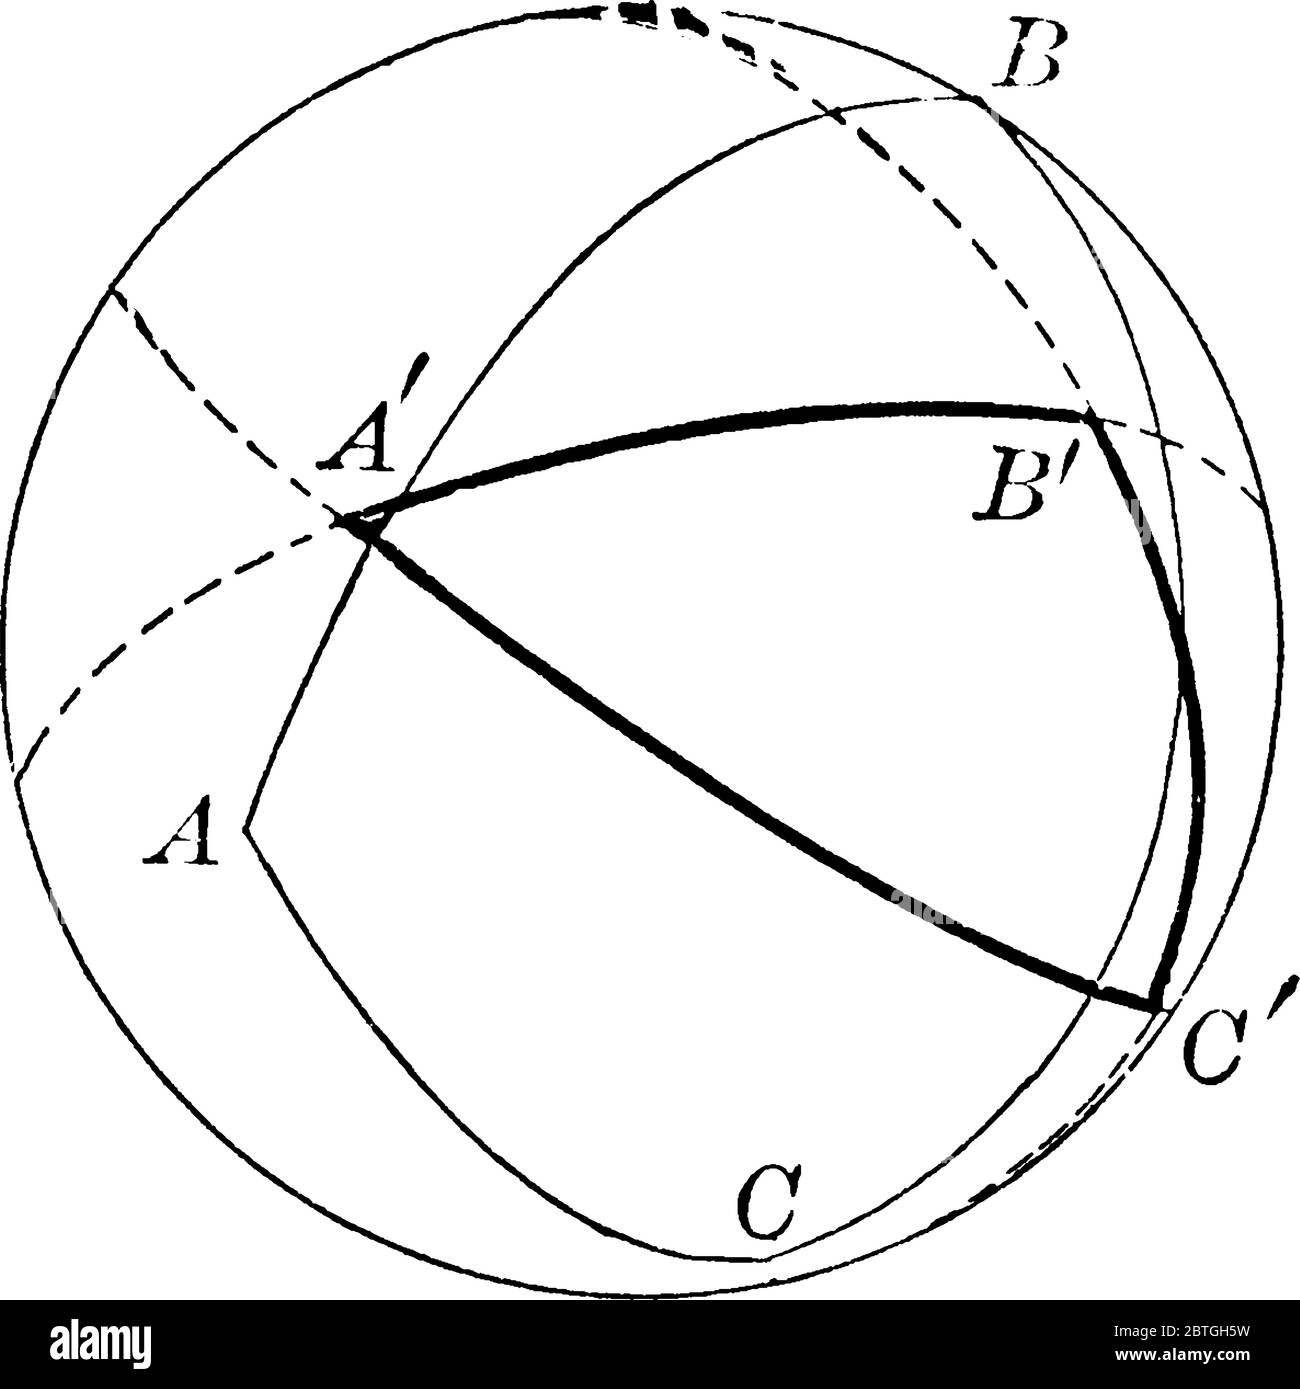 A spherical triangle formed on the surface of a sphere by three great circular arcs intersecting pairwise in three vertices., vintage line drawing or Stock Vector